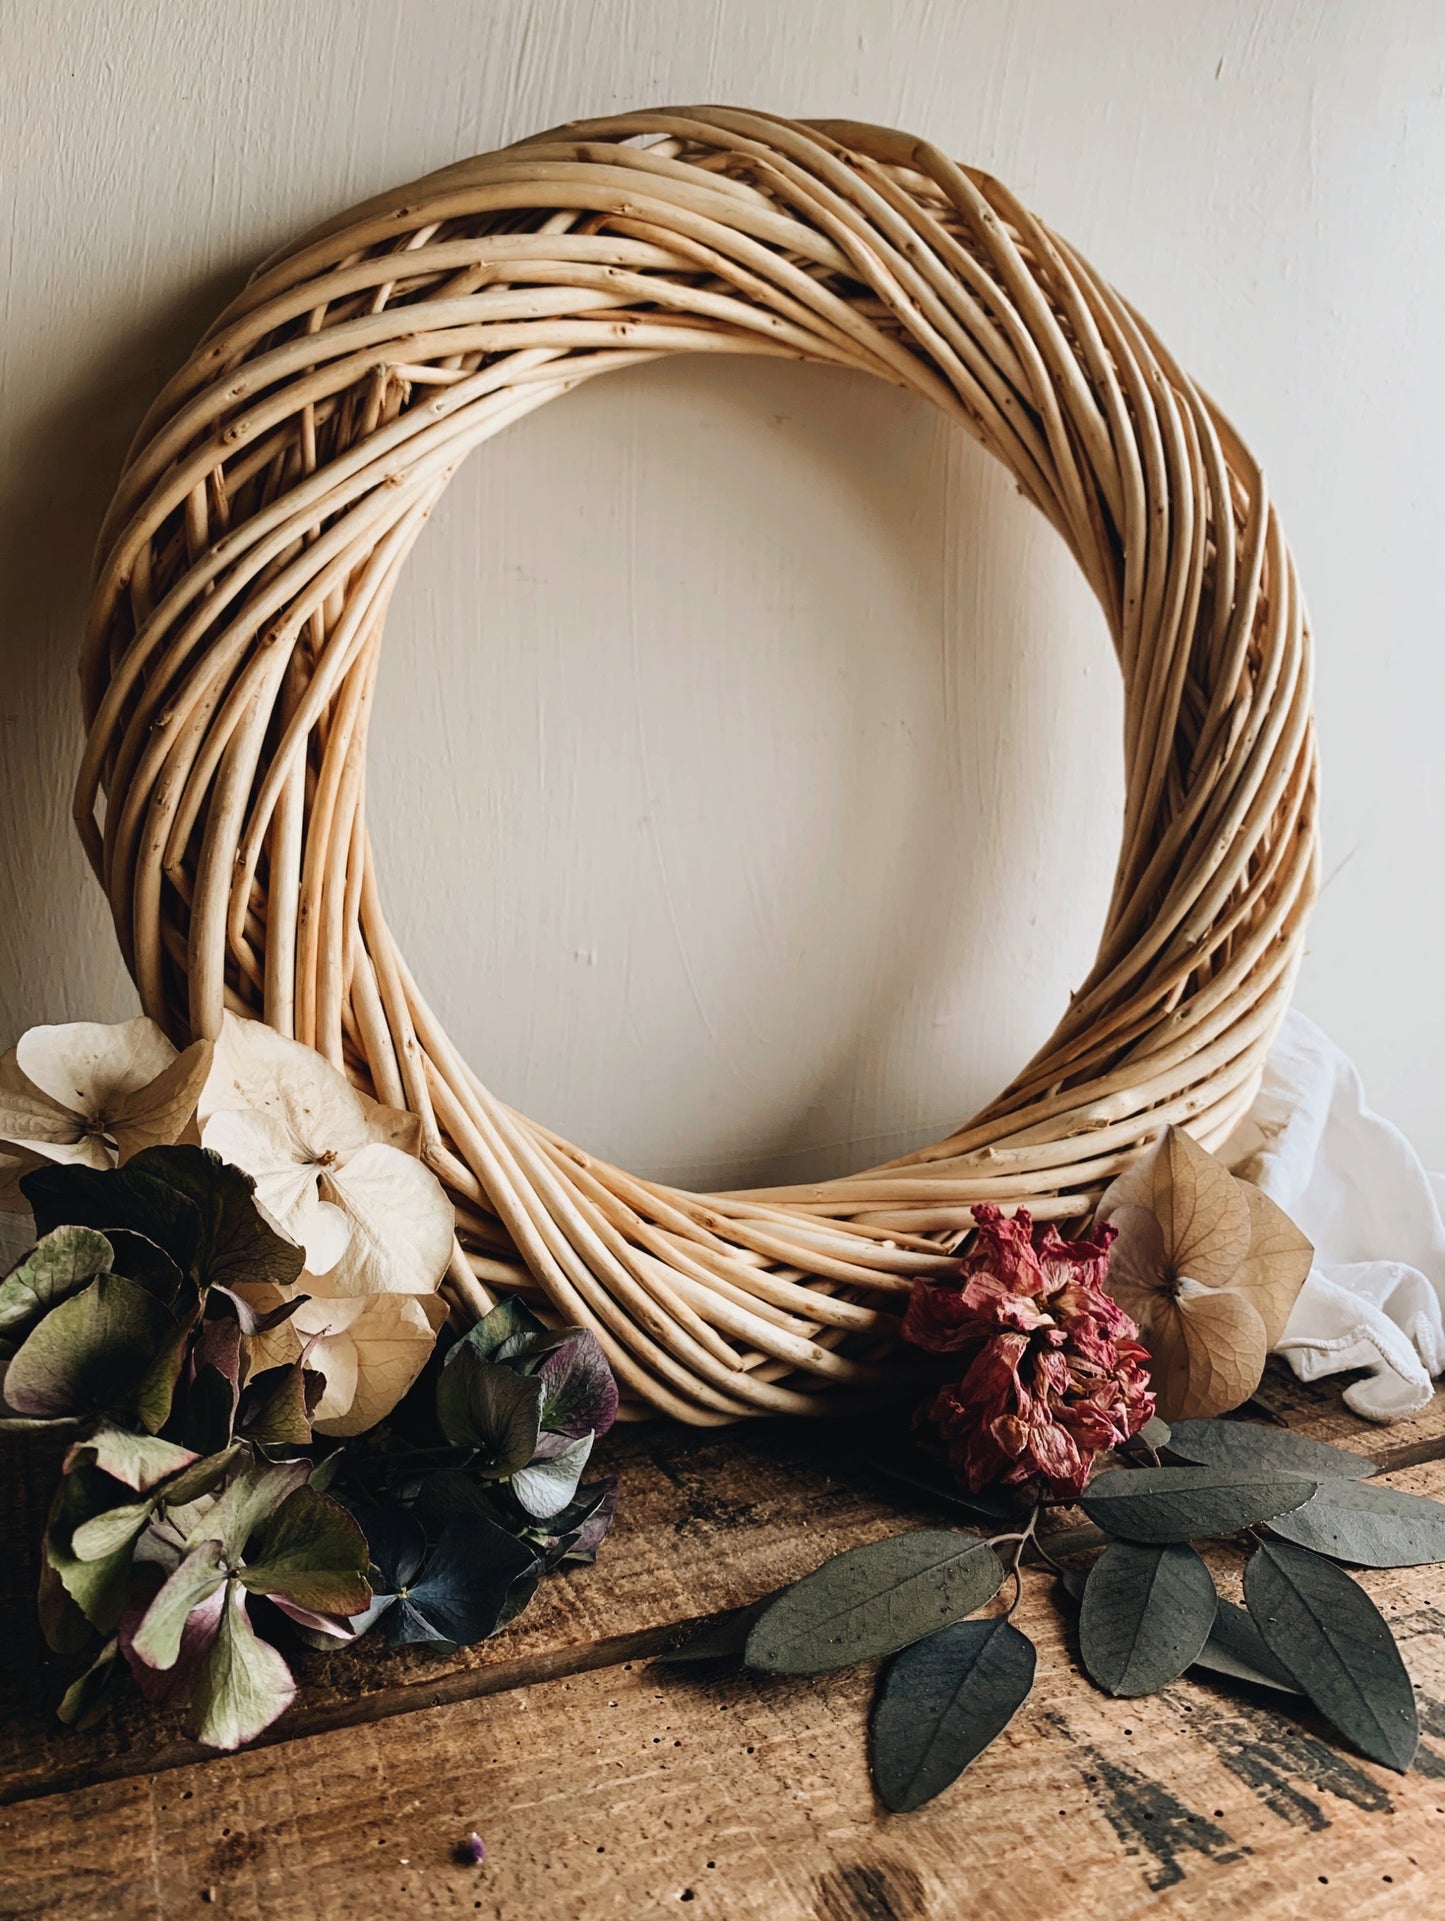 Rustic Wicker / Rattan Wreaths ~ two sizes available